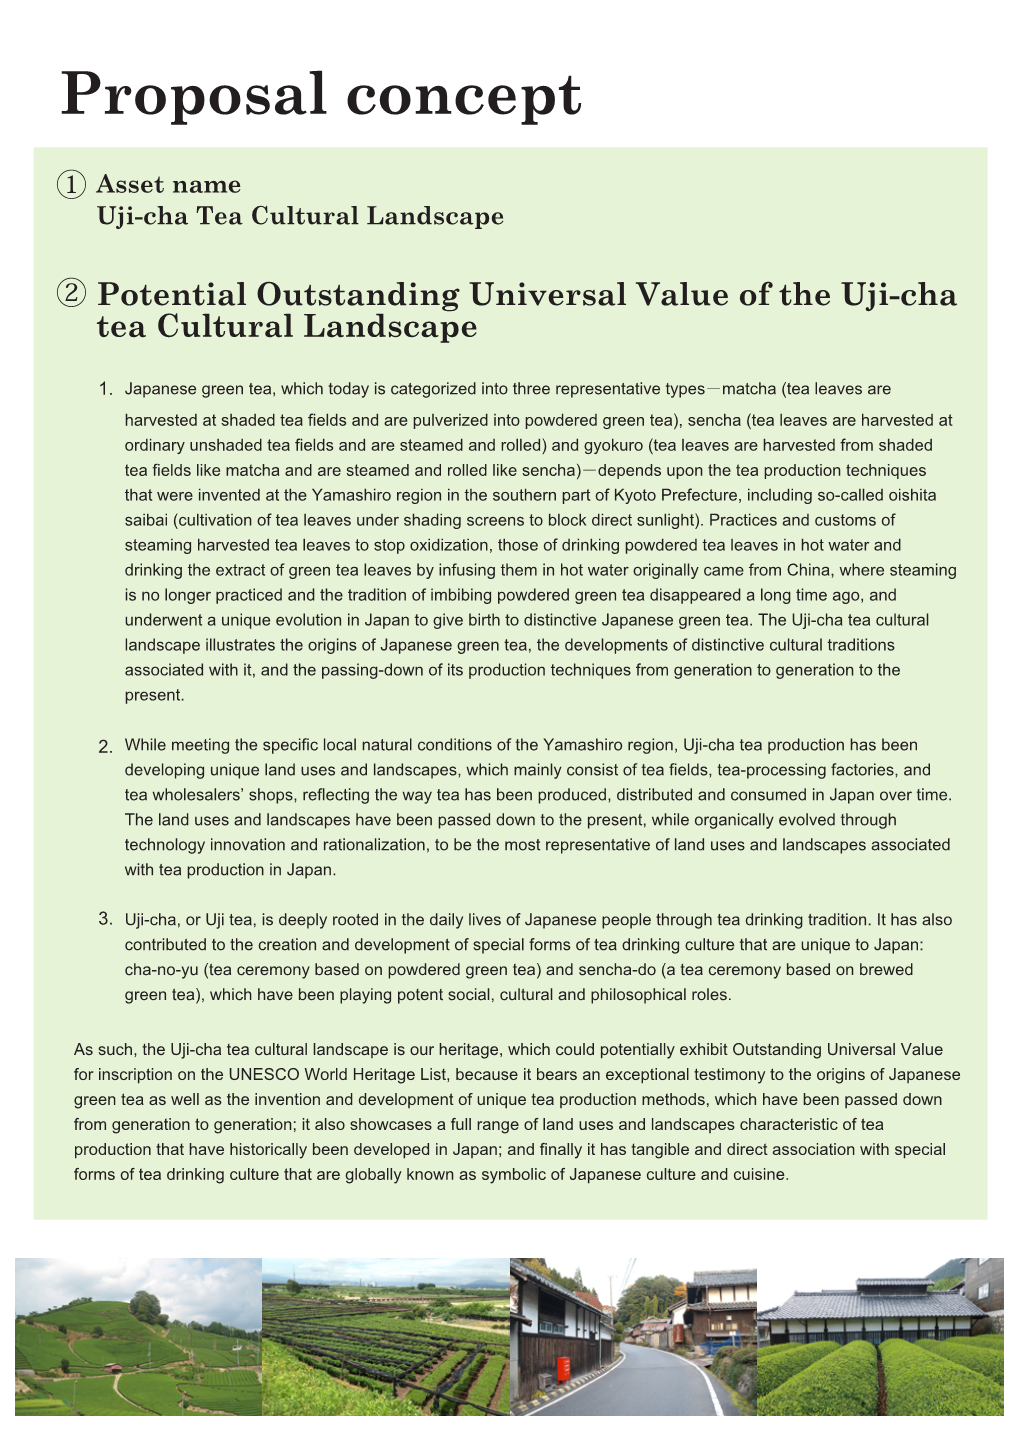 Potential Outstanding Universal Value of the Uji-Cha Tea Cultural Landscape